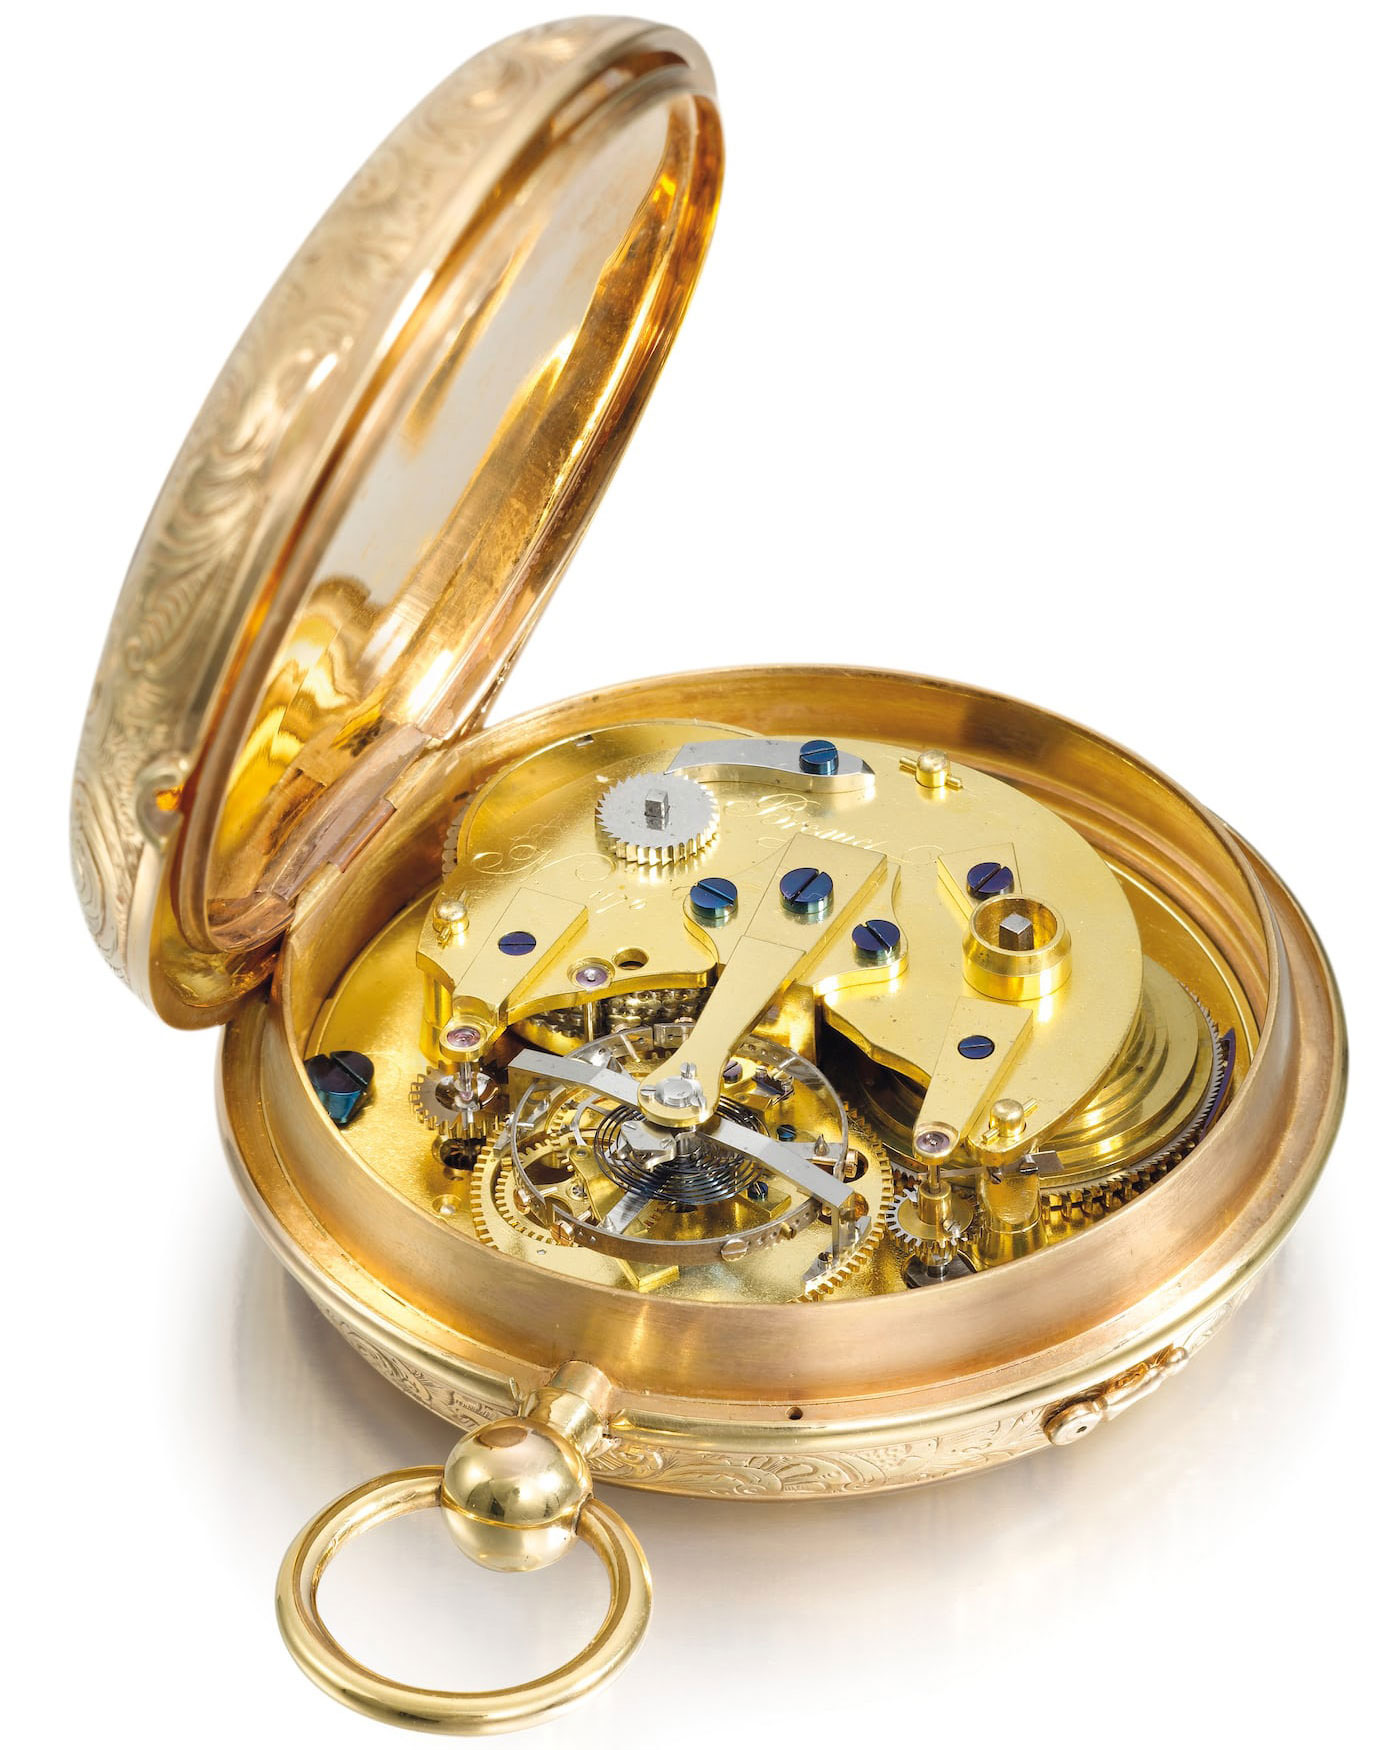 Breguet no. 1176, Sold to Count Potocki, a Polish nobleman and scientist, in 1809. Image, Breguet.